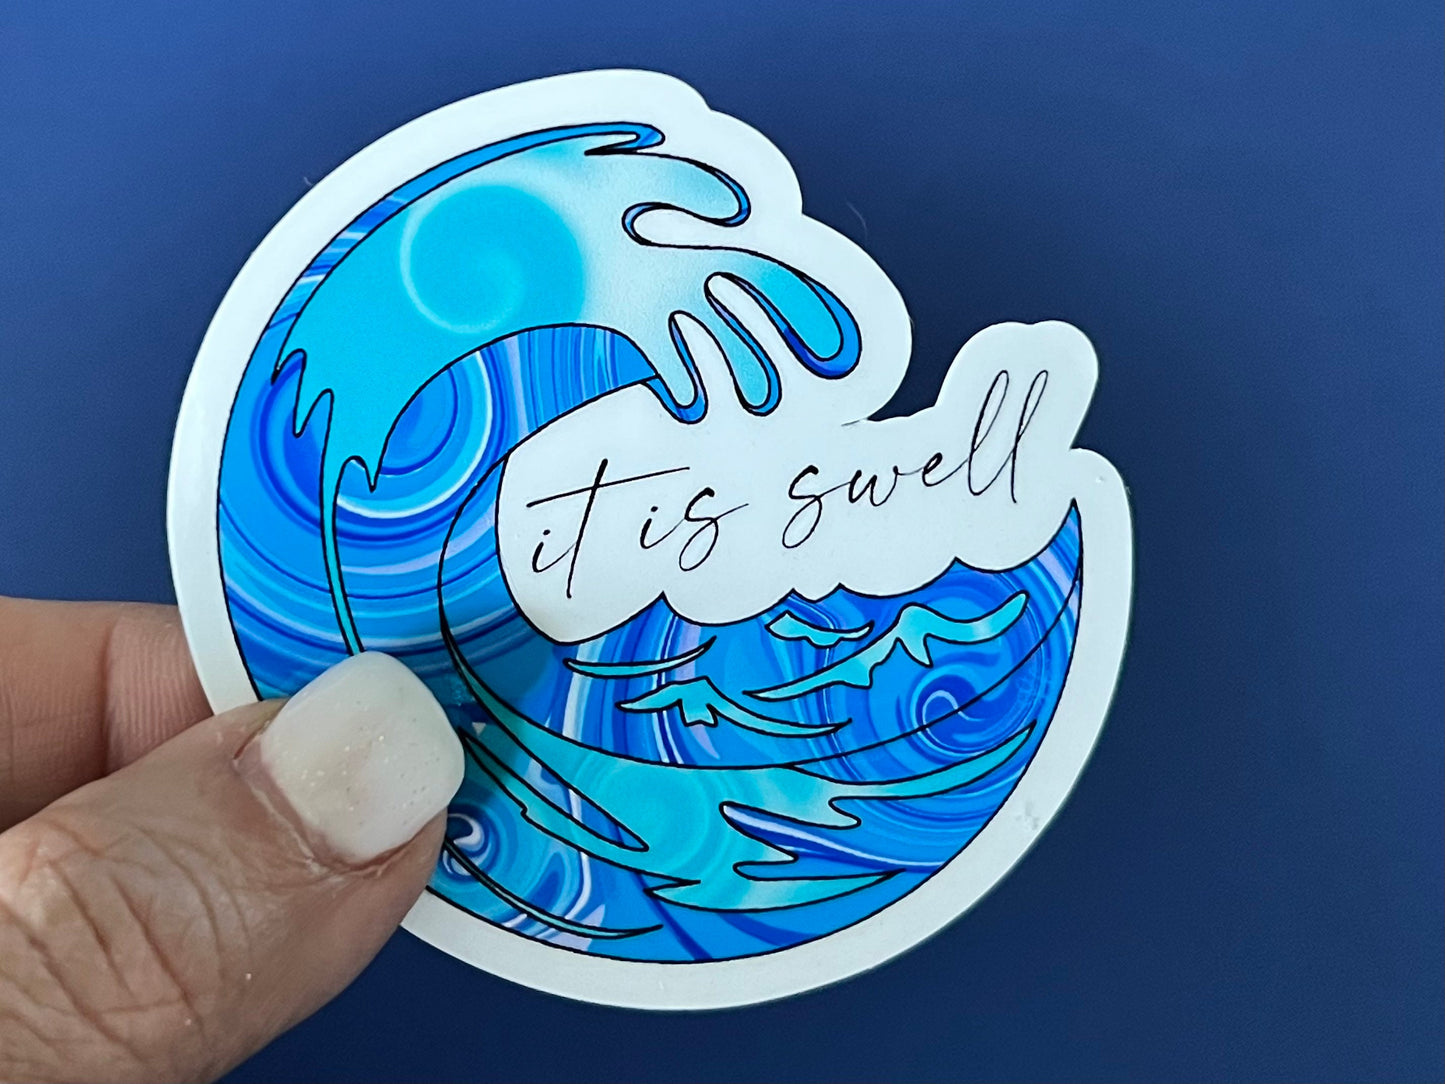 Wave crest, It is Swell - It is well series, 2.5” Christian Faith Waterproof Vinyl Sticker/ Decal